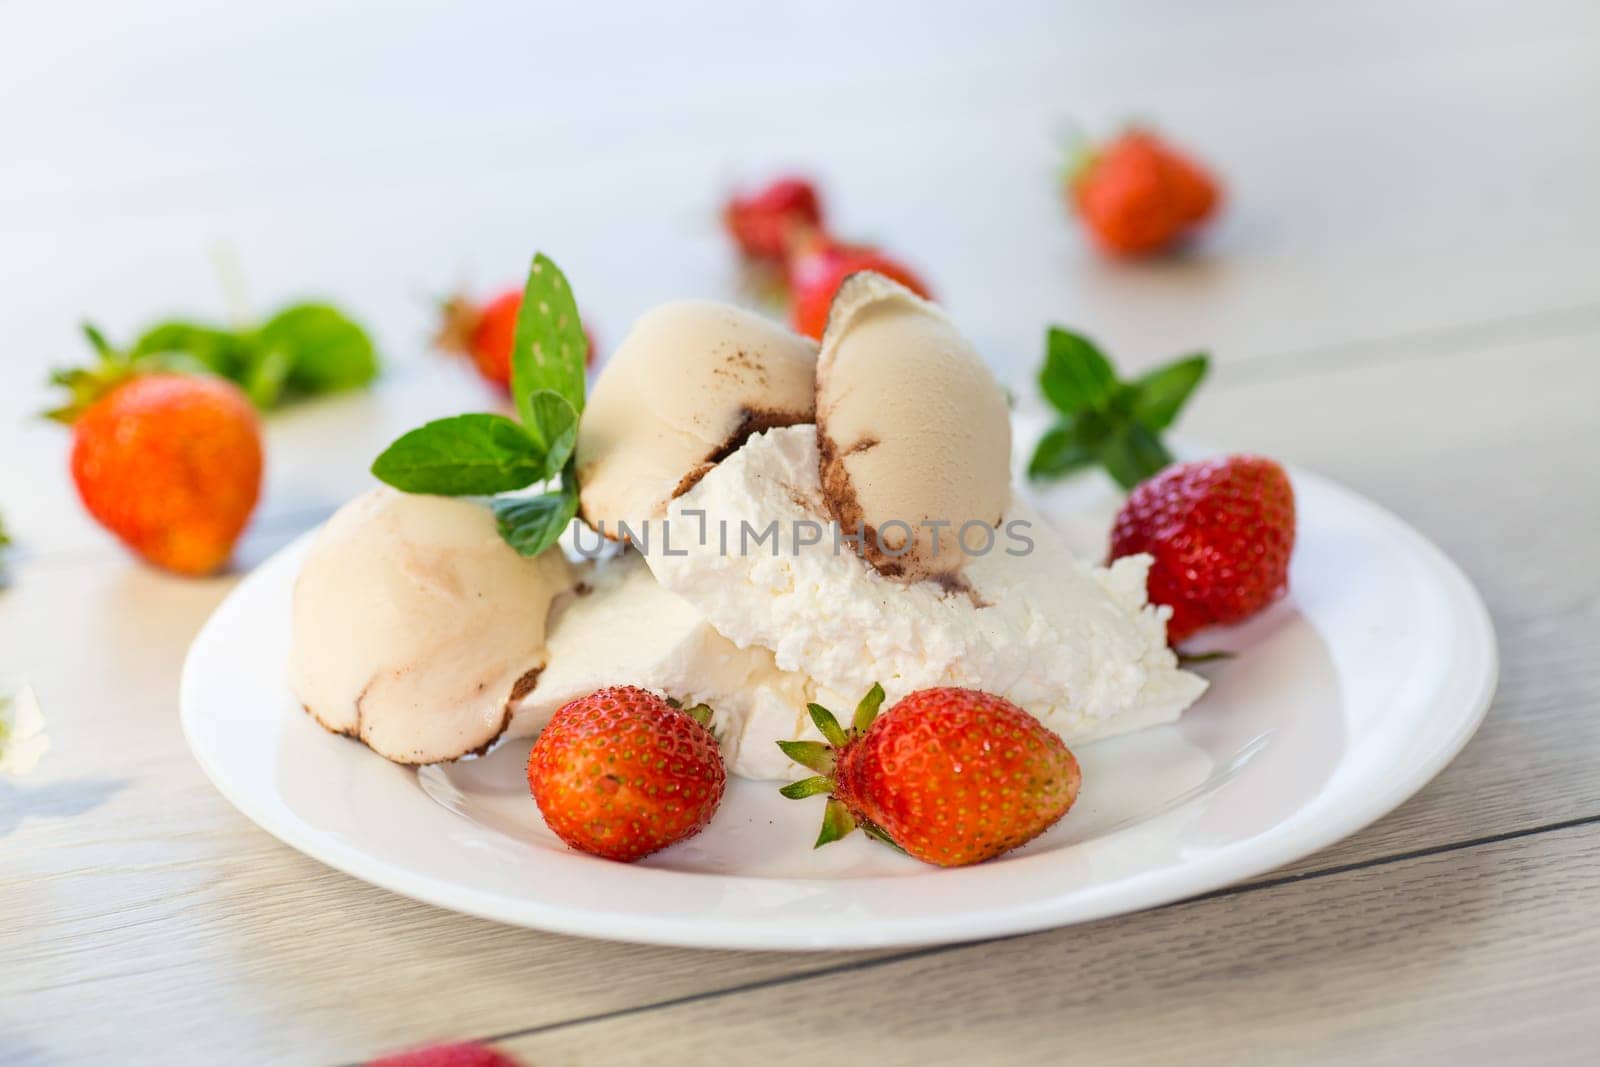 fresh organic cottage cheese with strawberries and ice cream in a plate on a wooden table .